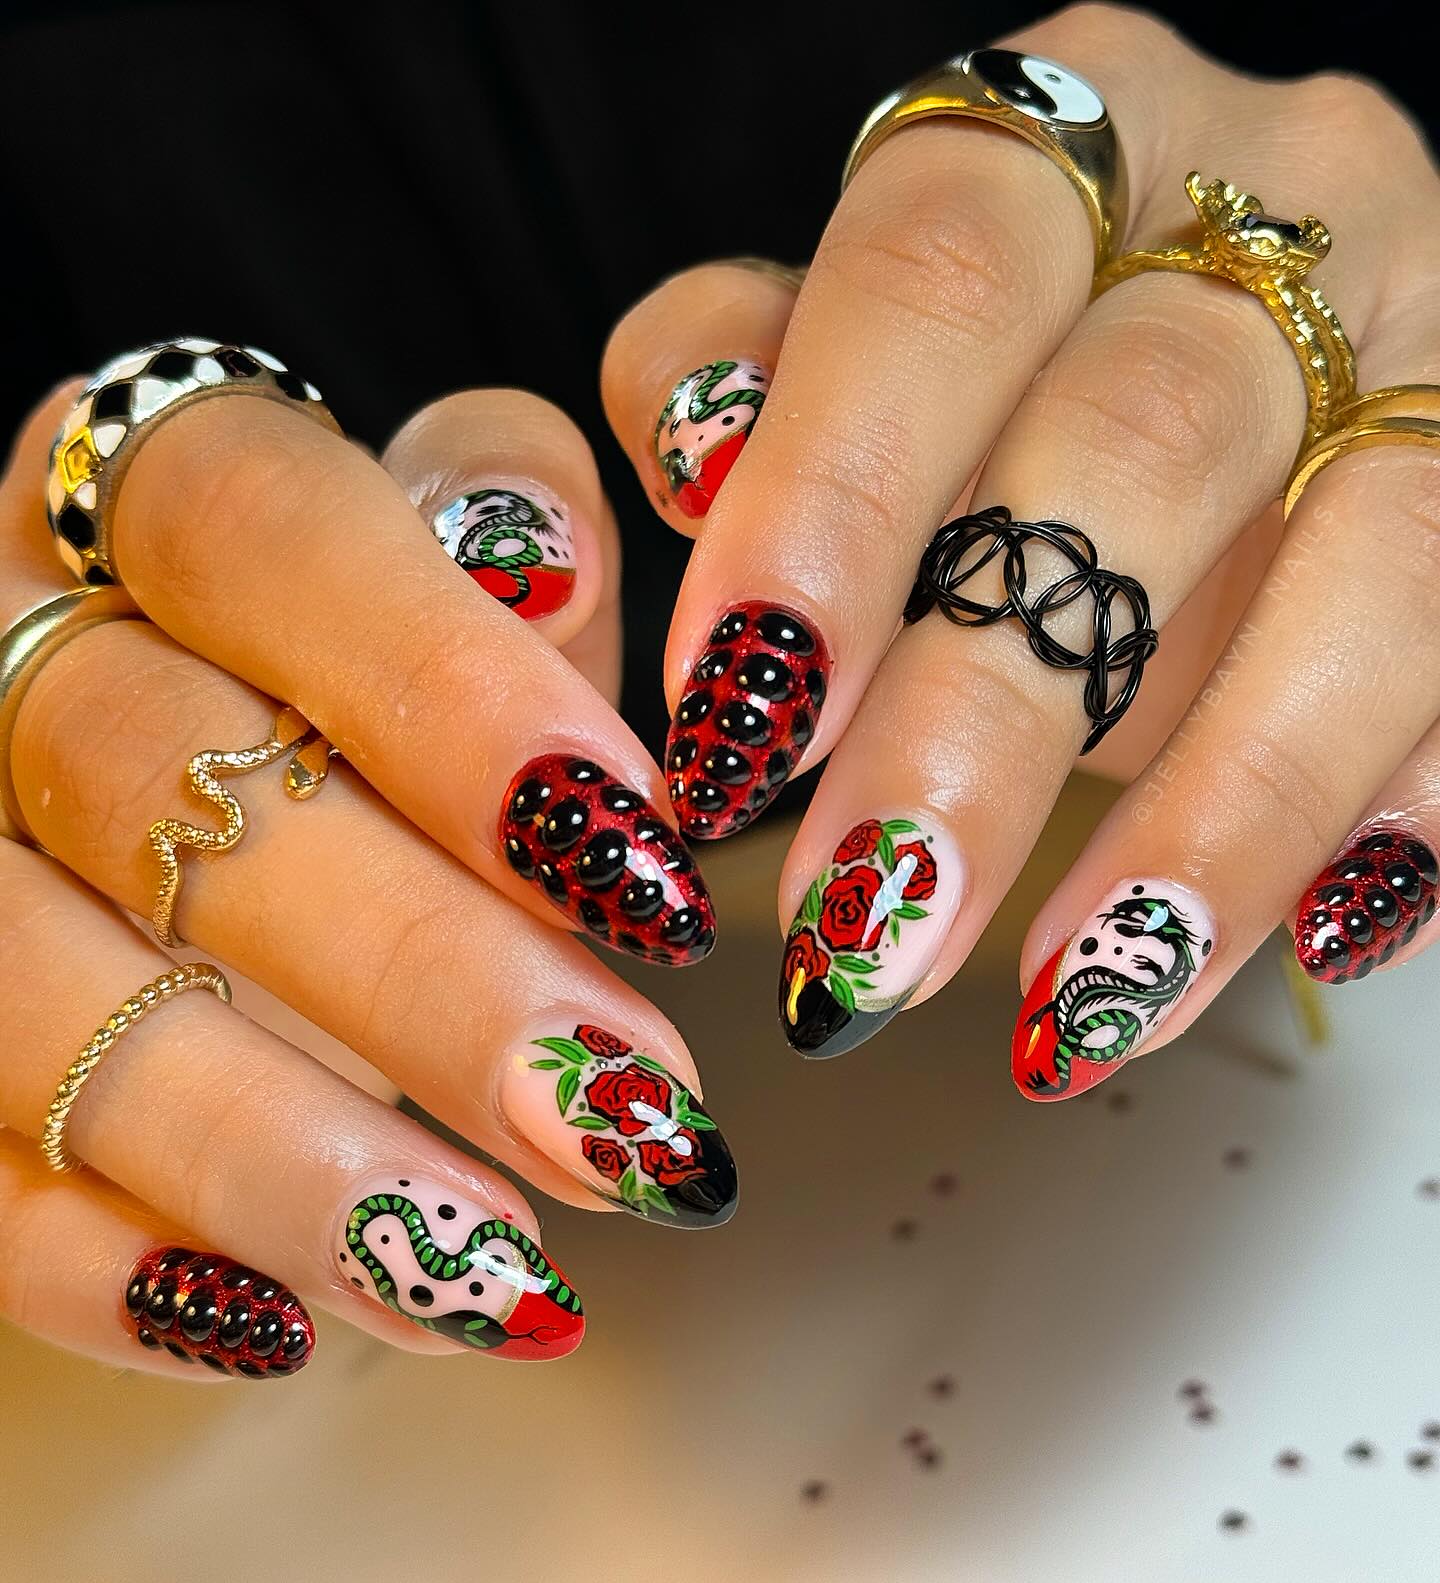 100+ Short Nail Designs You’ll Want To Try This Year images 87